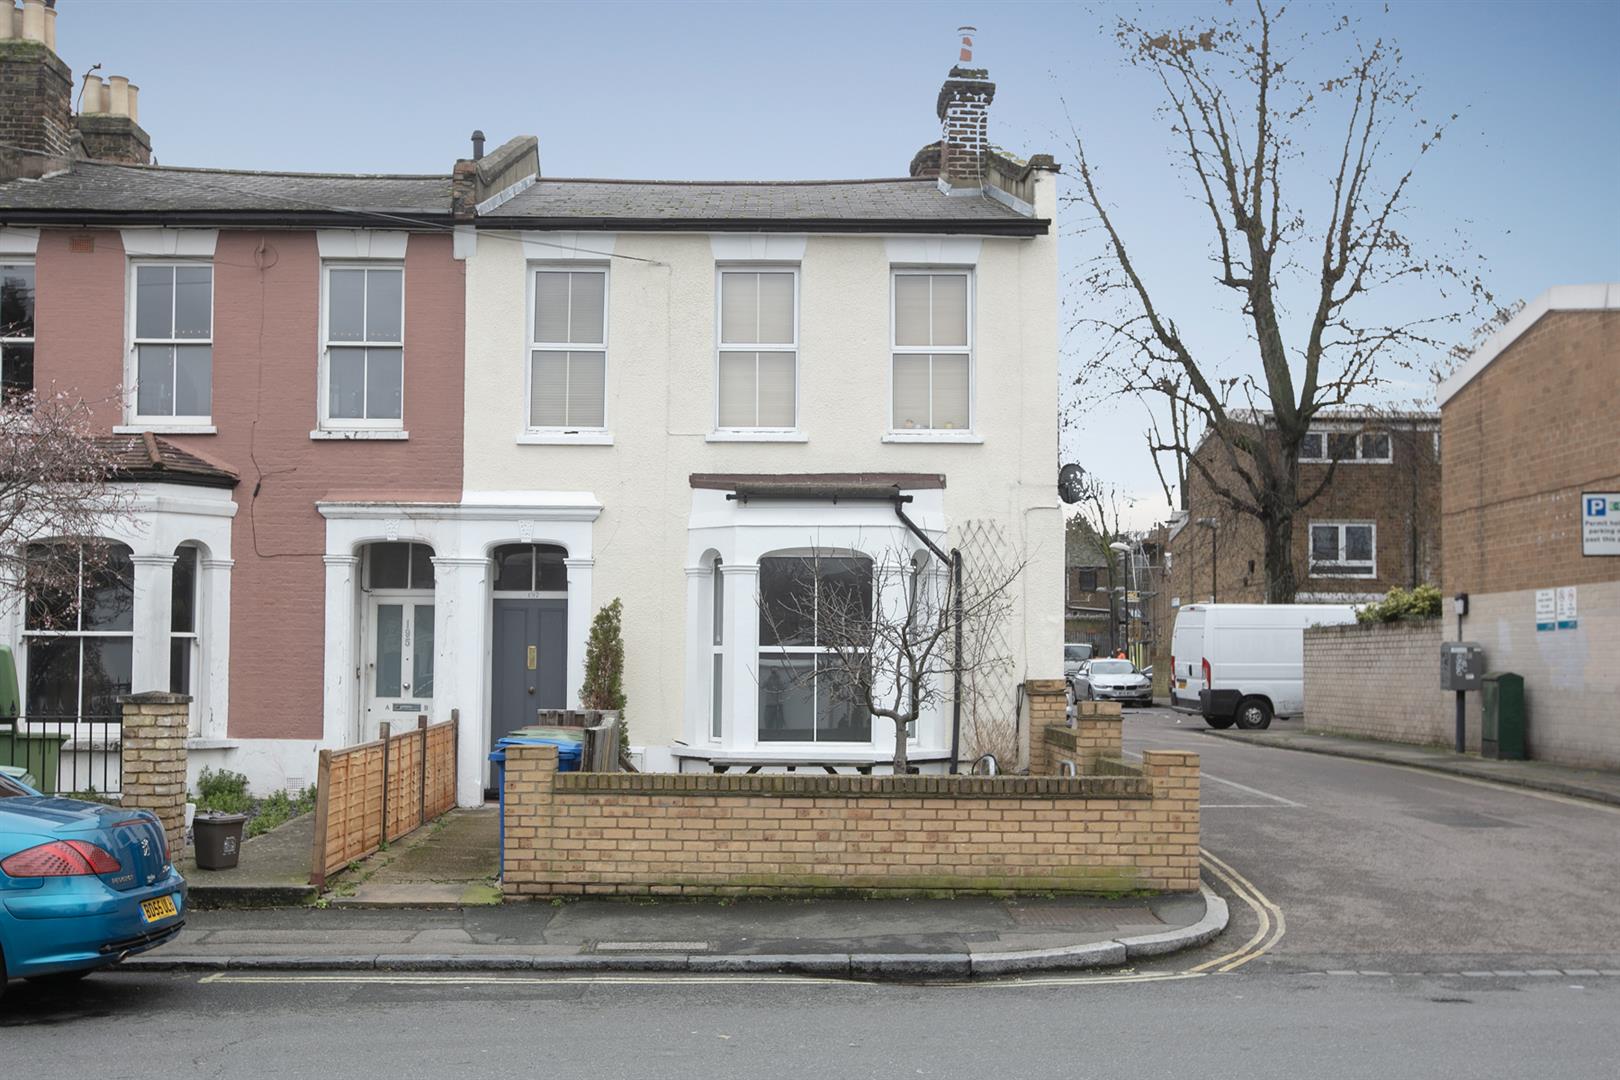 Flat - Conversion For Sale in Consort Road, Nunhead, SE15 1183 view1